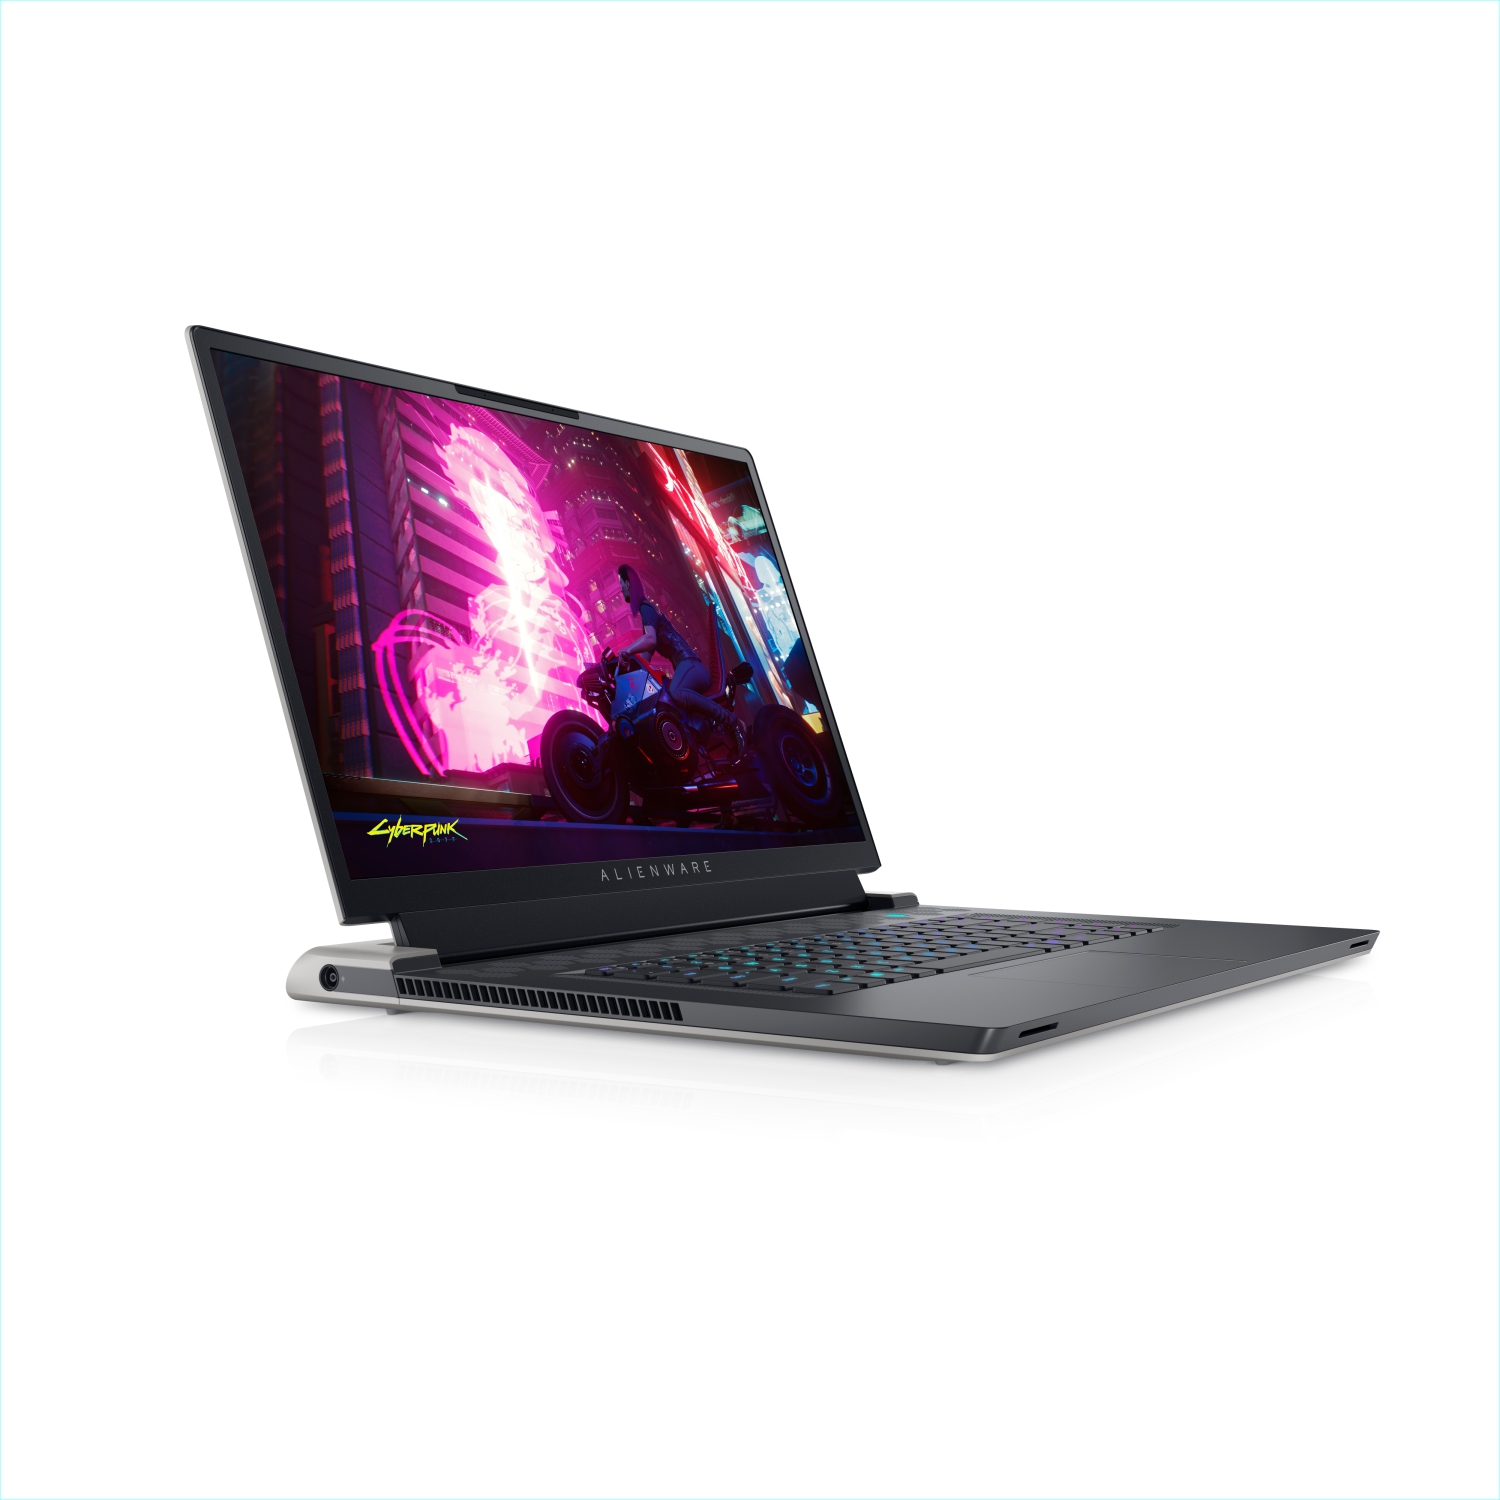 Refurbished (Excellent) - Dell Alienware X17 R1 Gaming Laptop (2021), 17.3" FHD, Core i7, 256GB SSD, 16GB RAM, RTX 3080, 8 Cores @ 4.6 GHz, 11th Gen CPU Certified